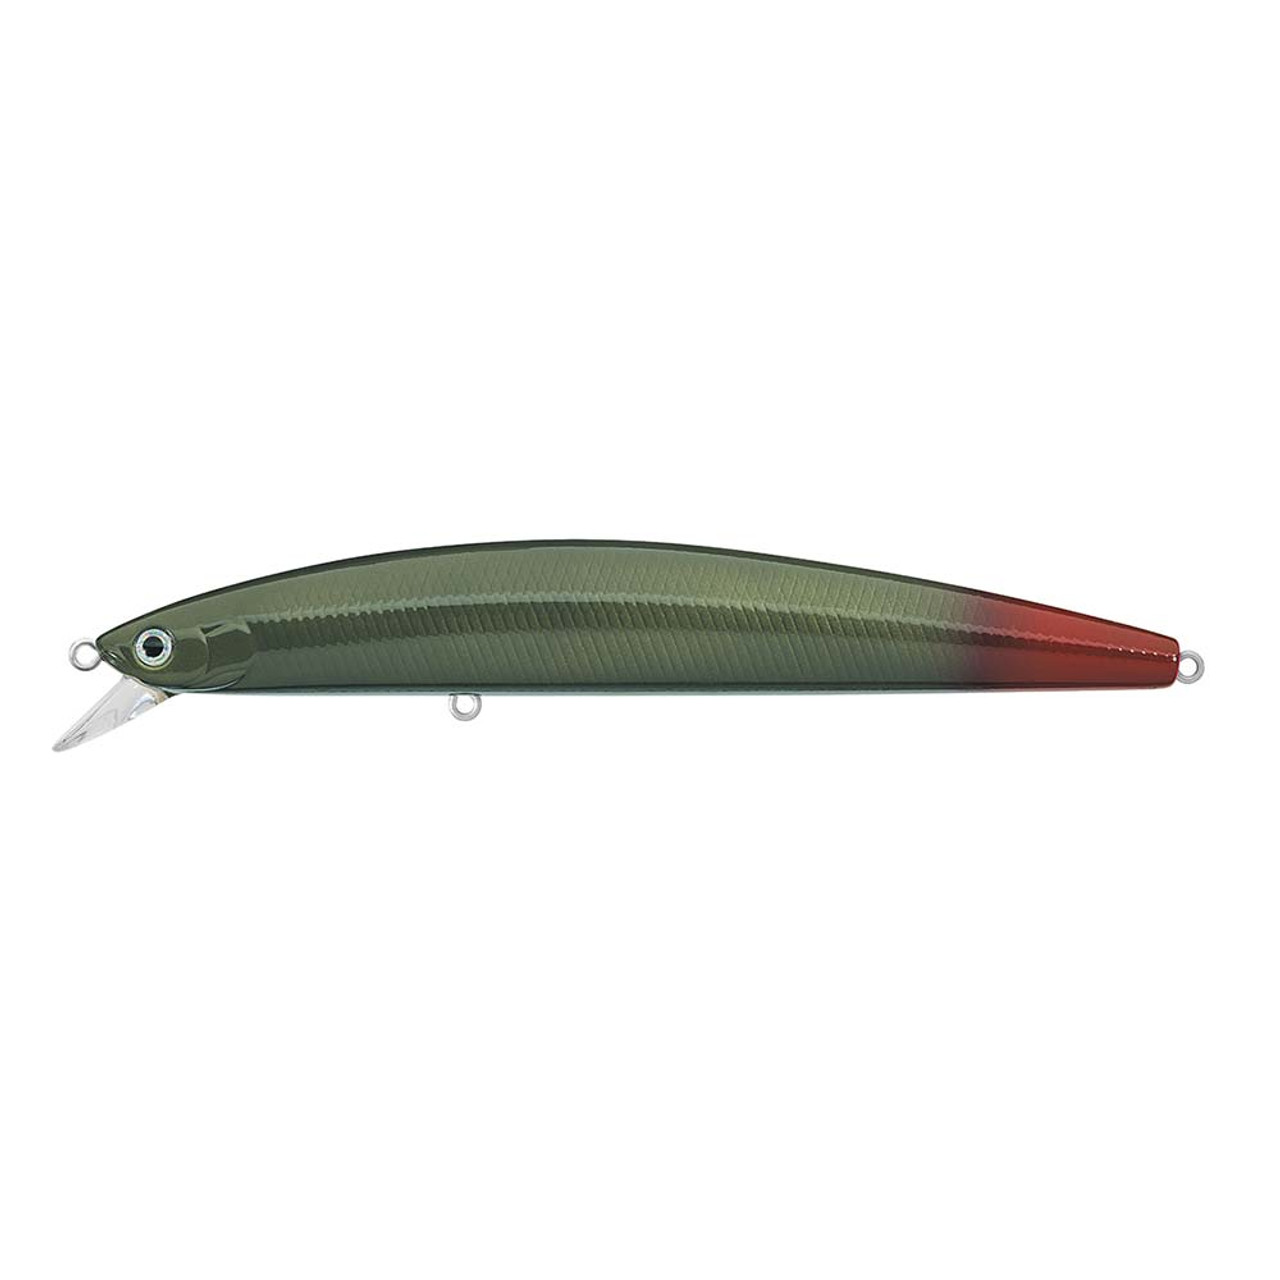 Daiwa Salt Pro Minnow - 5-1/8 - Floating - Wounded Soldier